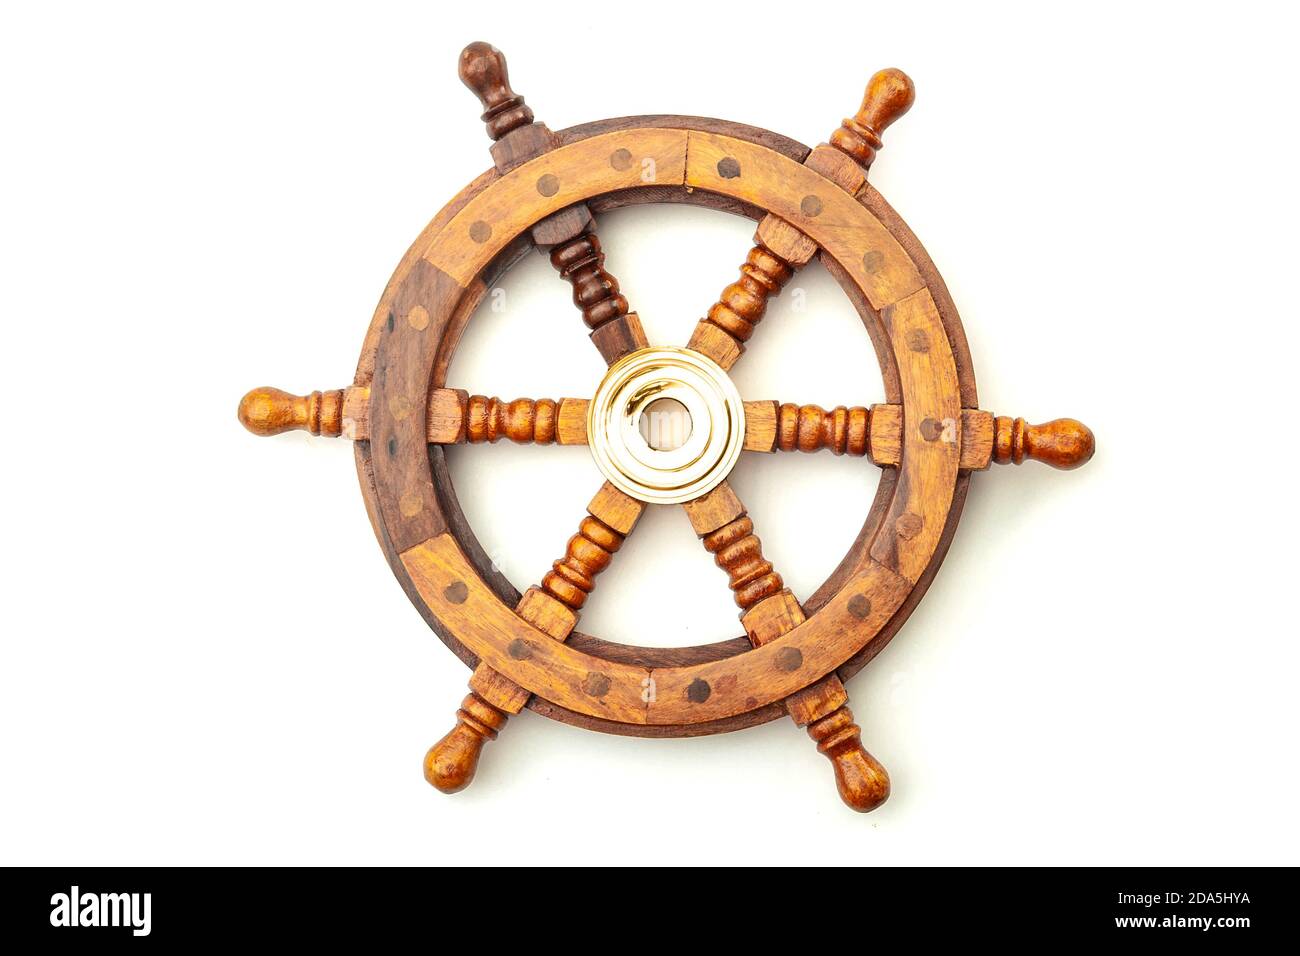 Navigation, nostalgia for bygone age of discovery and leadership conceptual idea with vintage ship steering wheel rudder made of wood and brass isolat Stock Photo